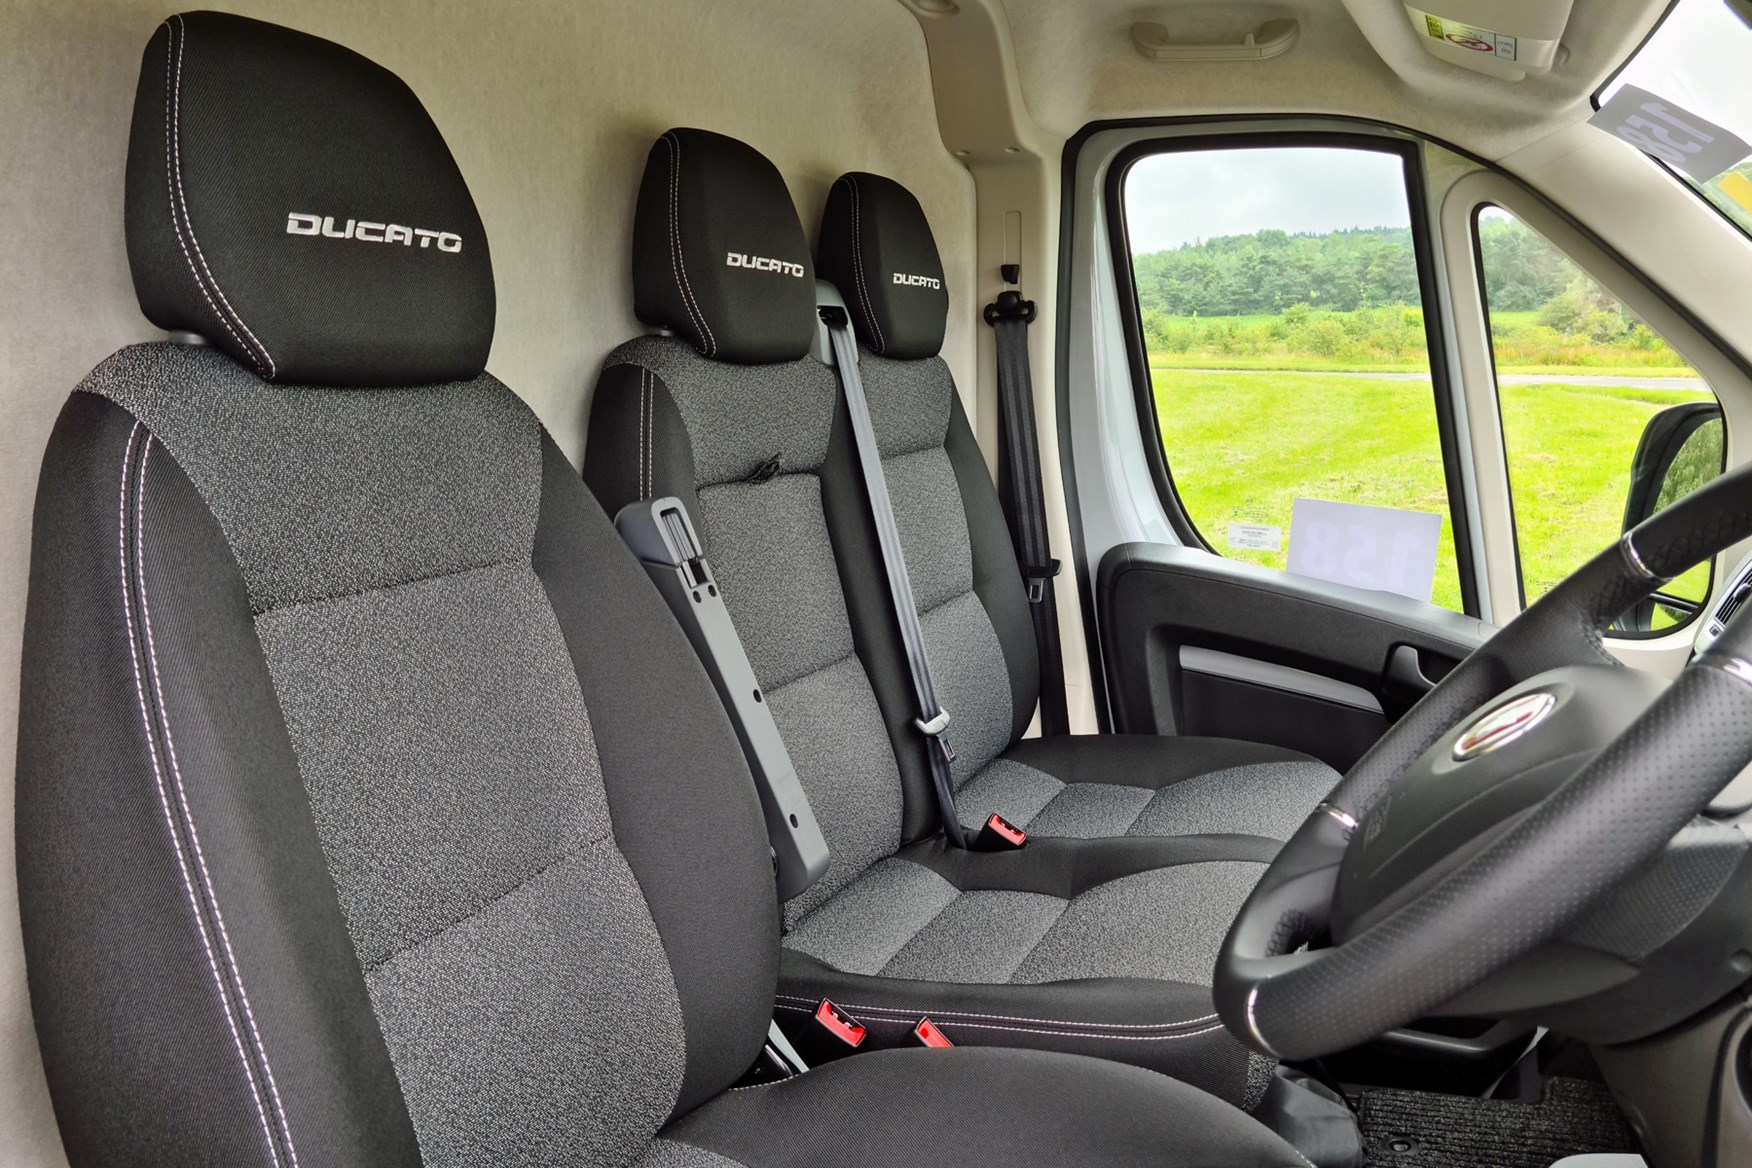 Fiat E-Ducato review - eTecnico seats with headrest embroidery